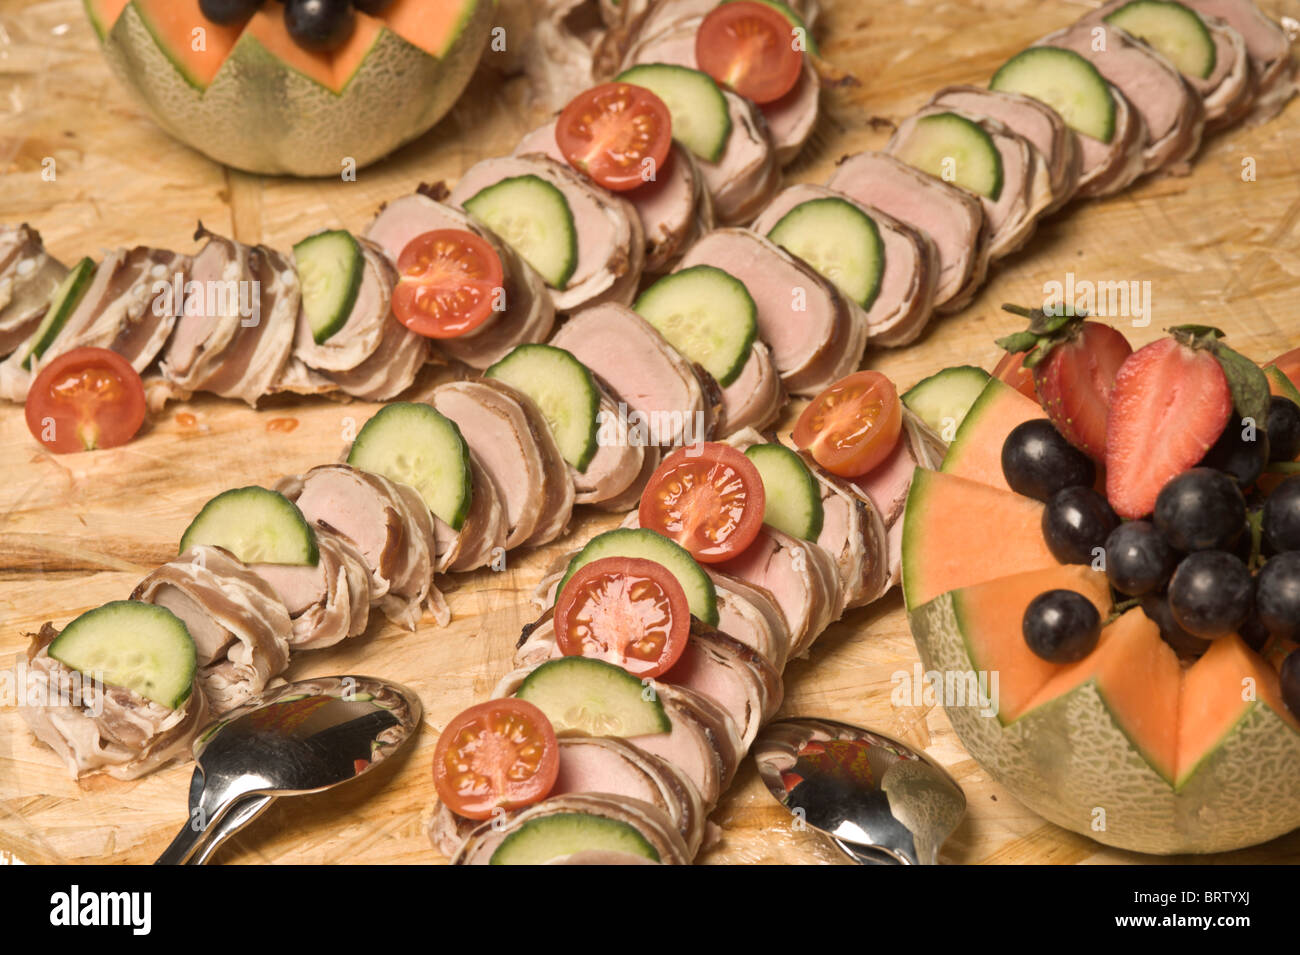 Cold cuts with pork medaillons, buffet, food Stock Photo